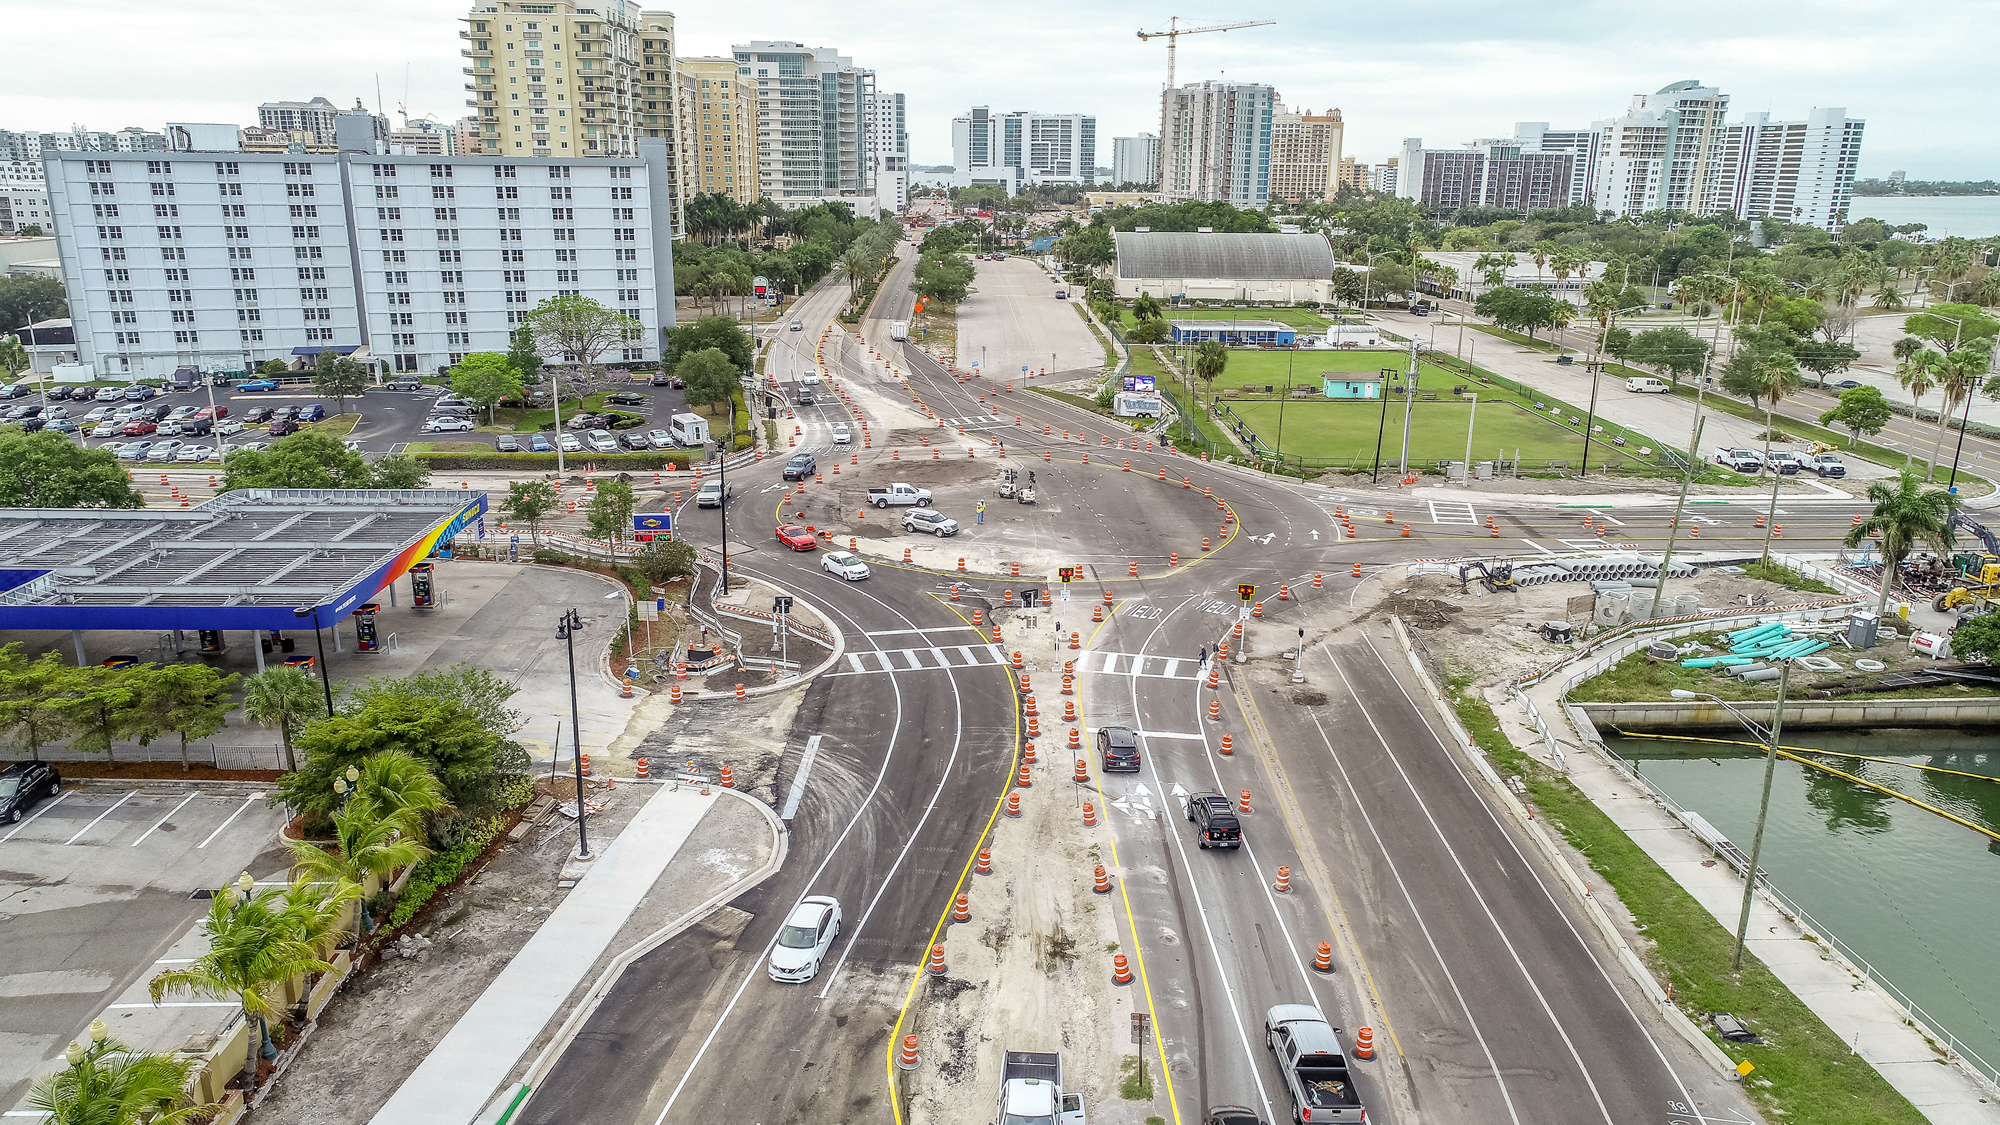 A series of additional roundabouts on U.S. 41 in the city of Sarasota are part of the MPO's long-term plan for improving multimodal transportation on major corridors. File photo.